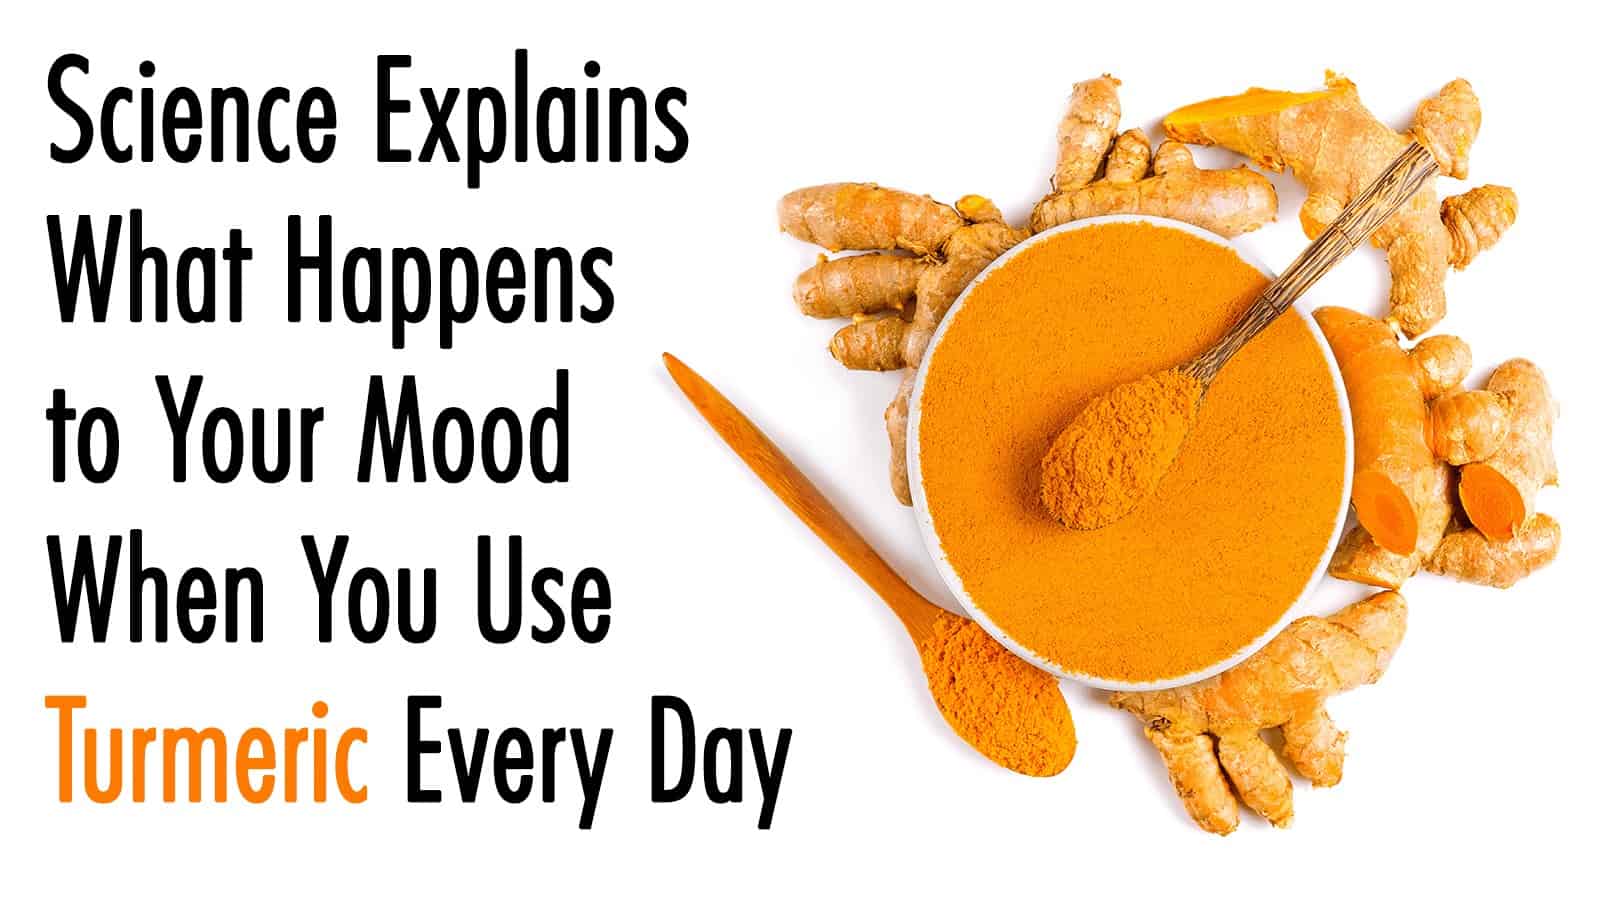 Science Explains What Happens to Your Mood When You Use Turmeric Every Day